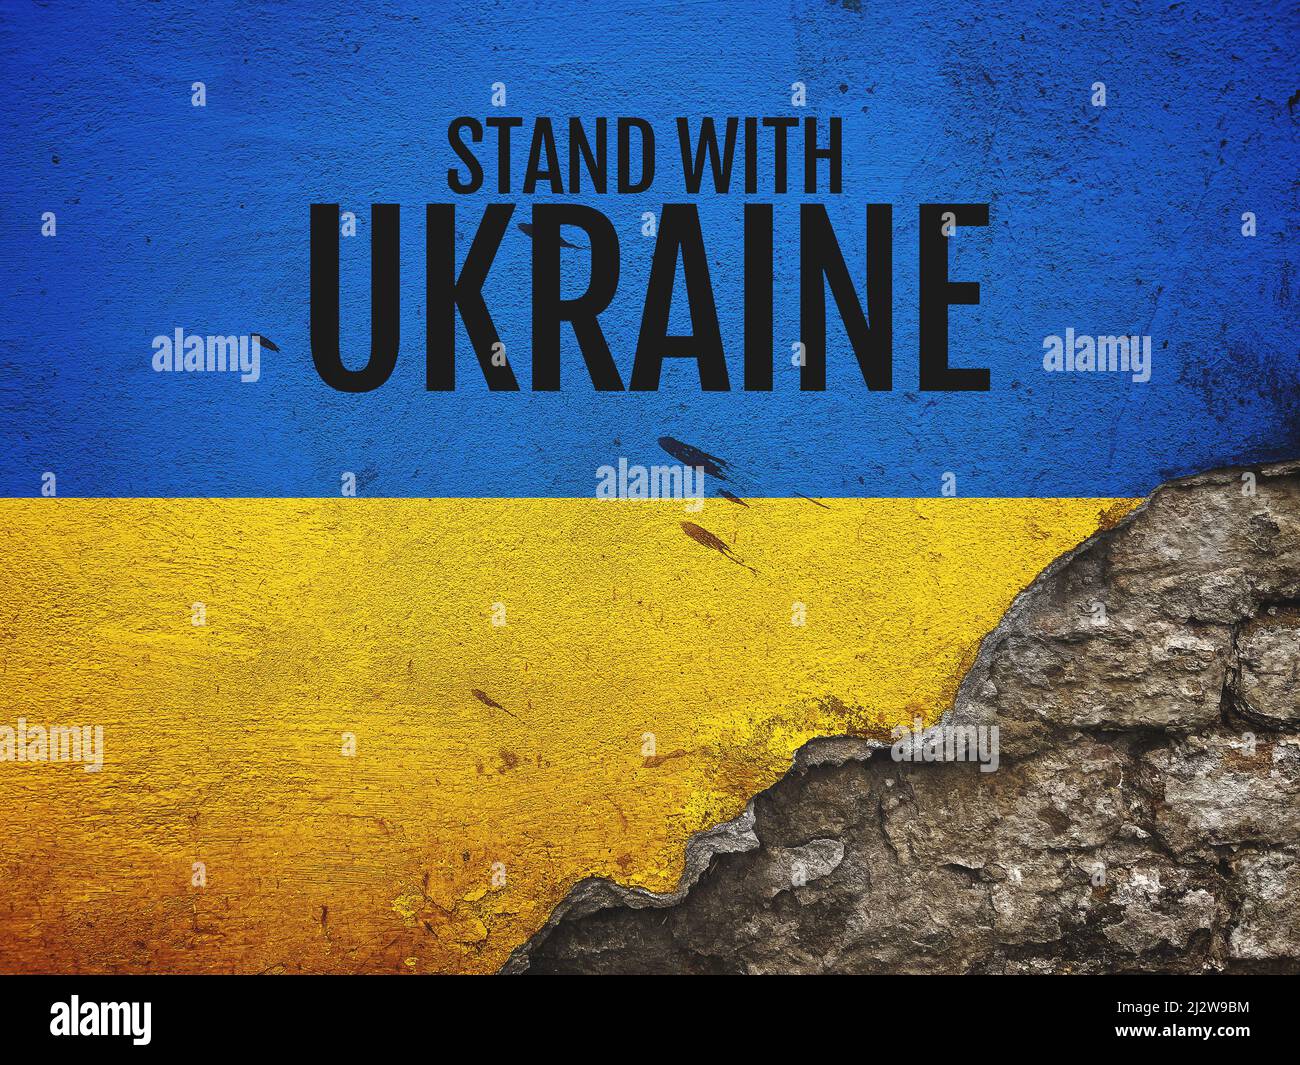 Stand with Ukraine message on worn old brick wall painted in colors of Ukrainian flag, copy space included Stock Photo